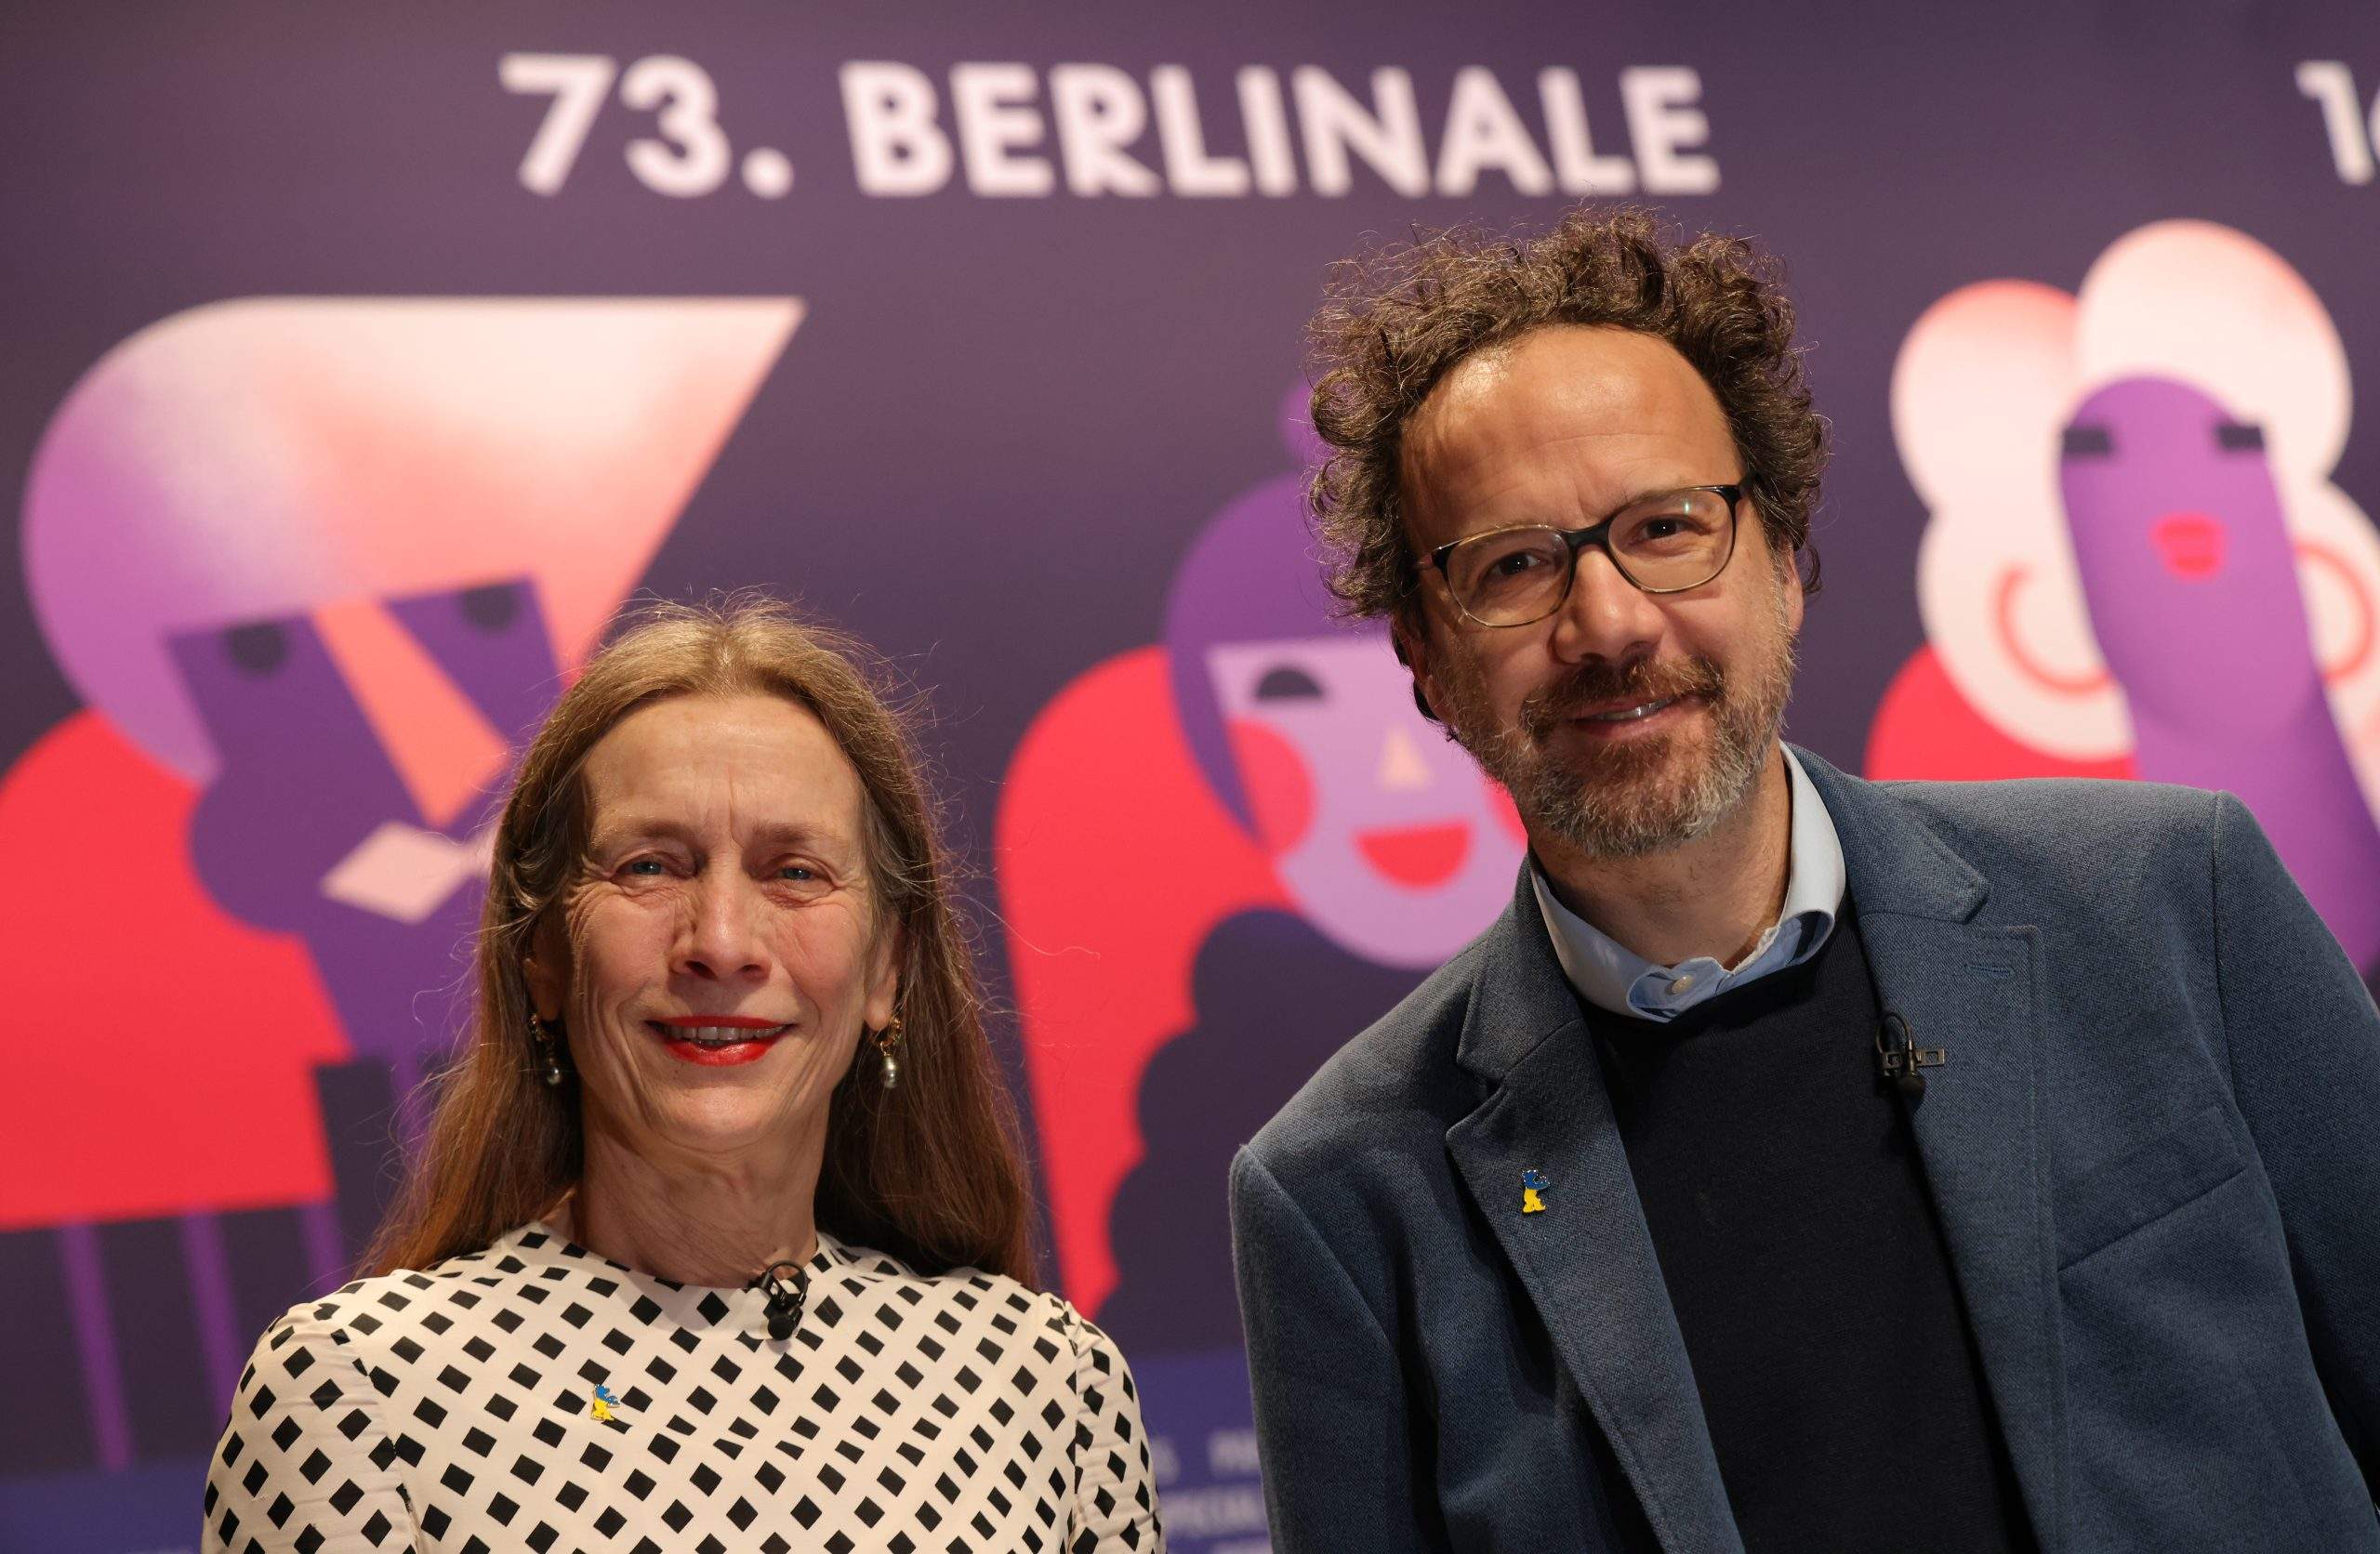 Berlinale chatrian scaled 1